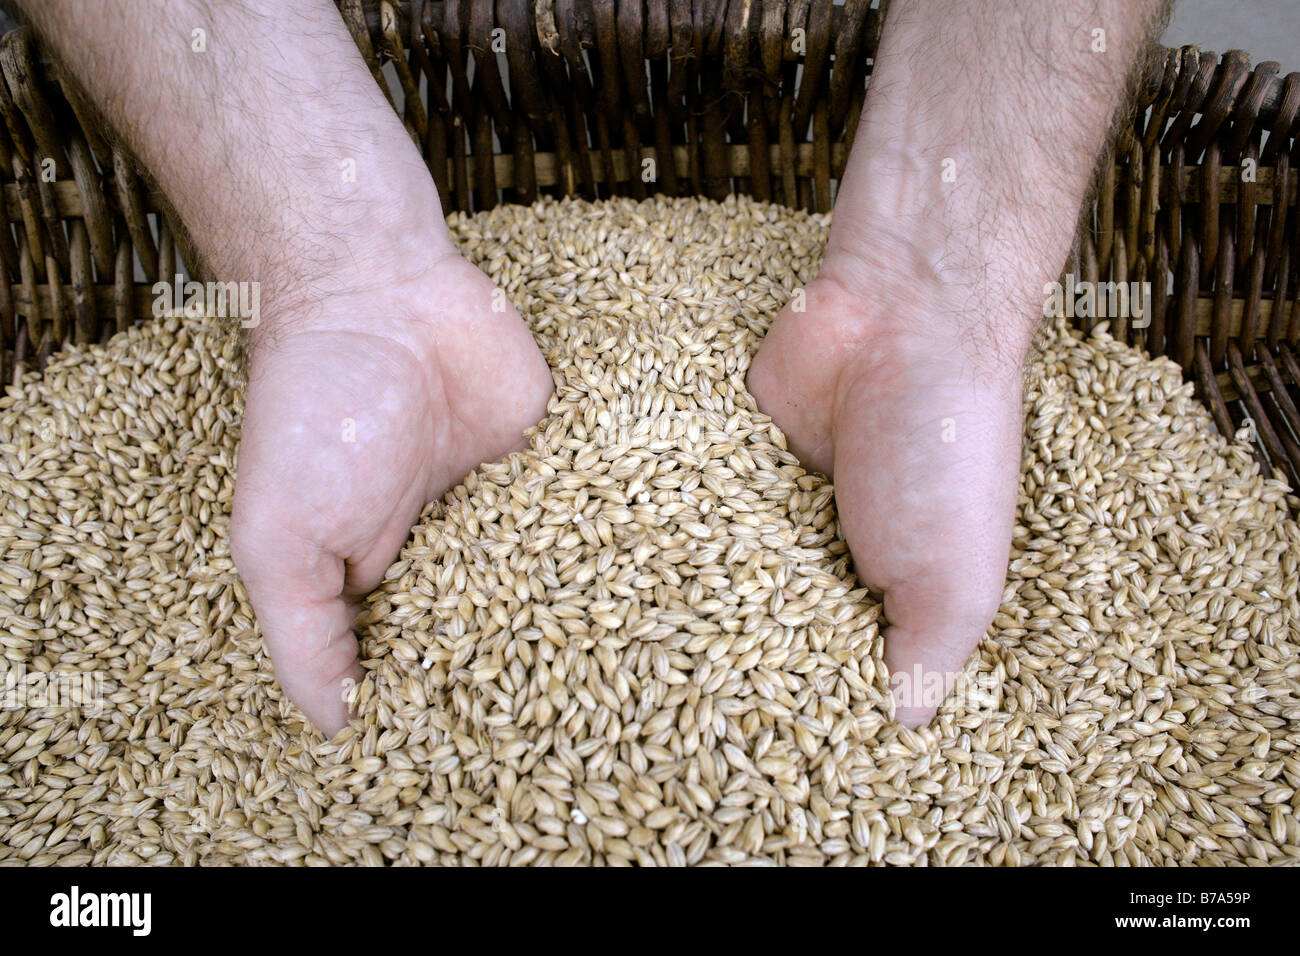 Hands scooping barley, barley malt quality test at Kulmbacher Brewery AG, Kulmbacher Brauerei AG in Kulmbach, Bavaria, Germany, Stock Photo